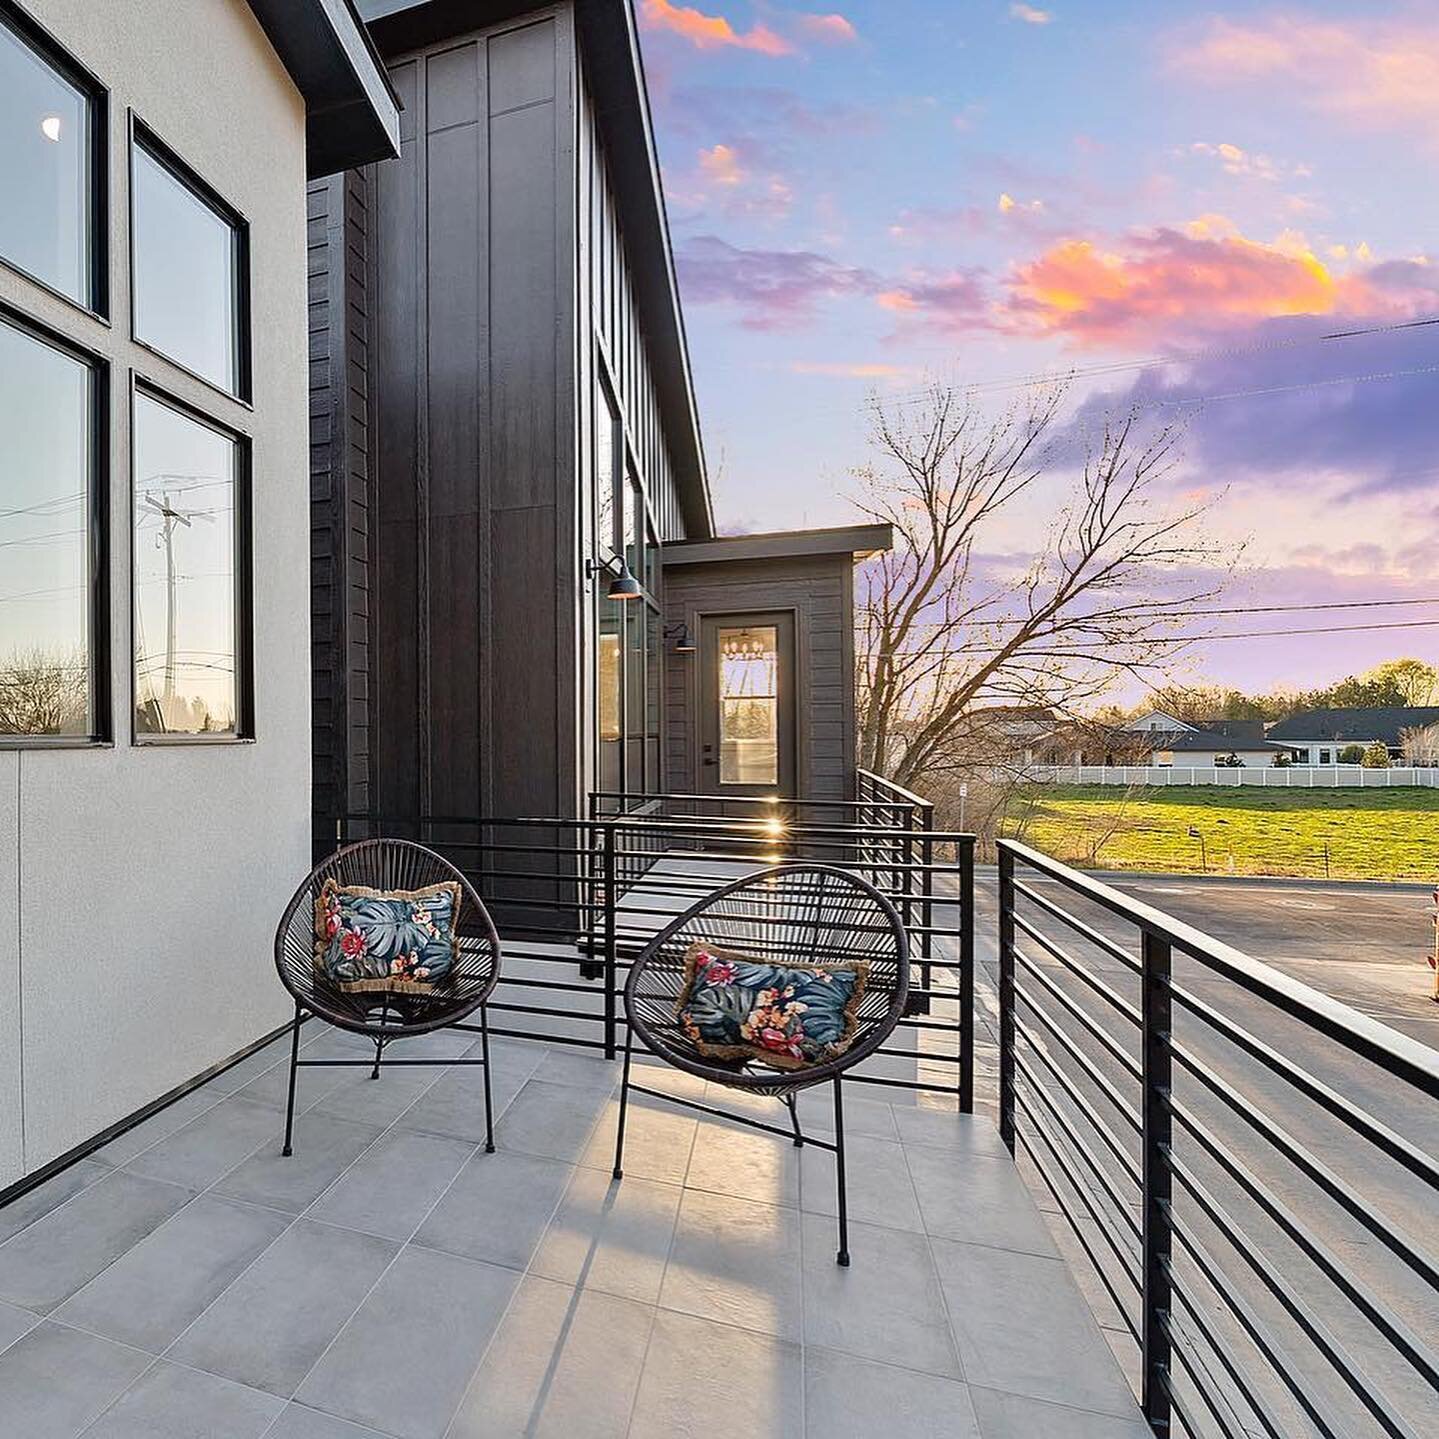 Who enjoys a little outside porch time when the sun is setting? Can&rsquo;t wait to be outside more! HUGE shoutout to @cookbrosusa for the opportunity to build these railings!

📸 cred: @cookbrosusa